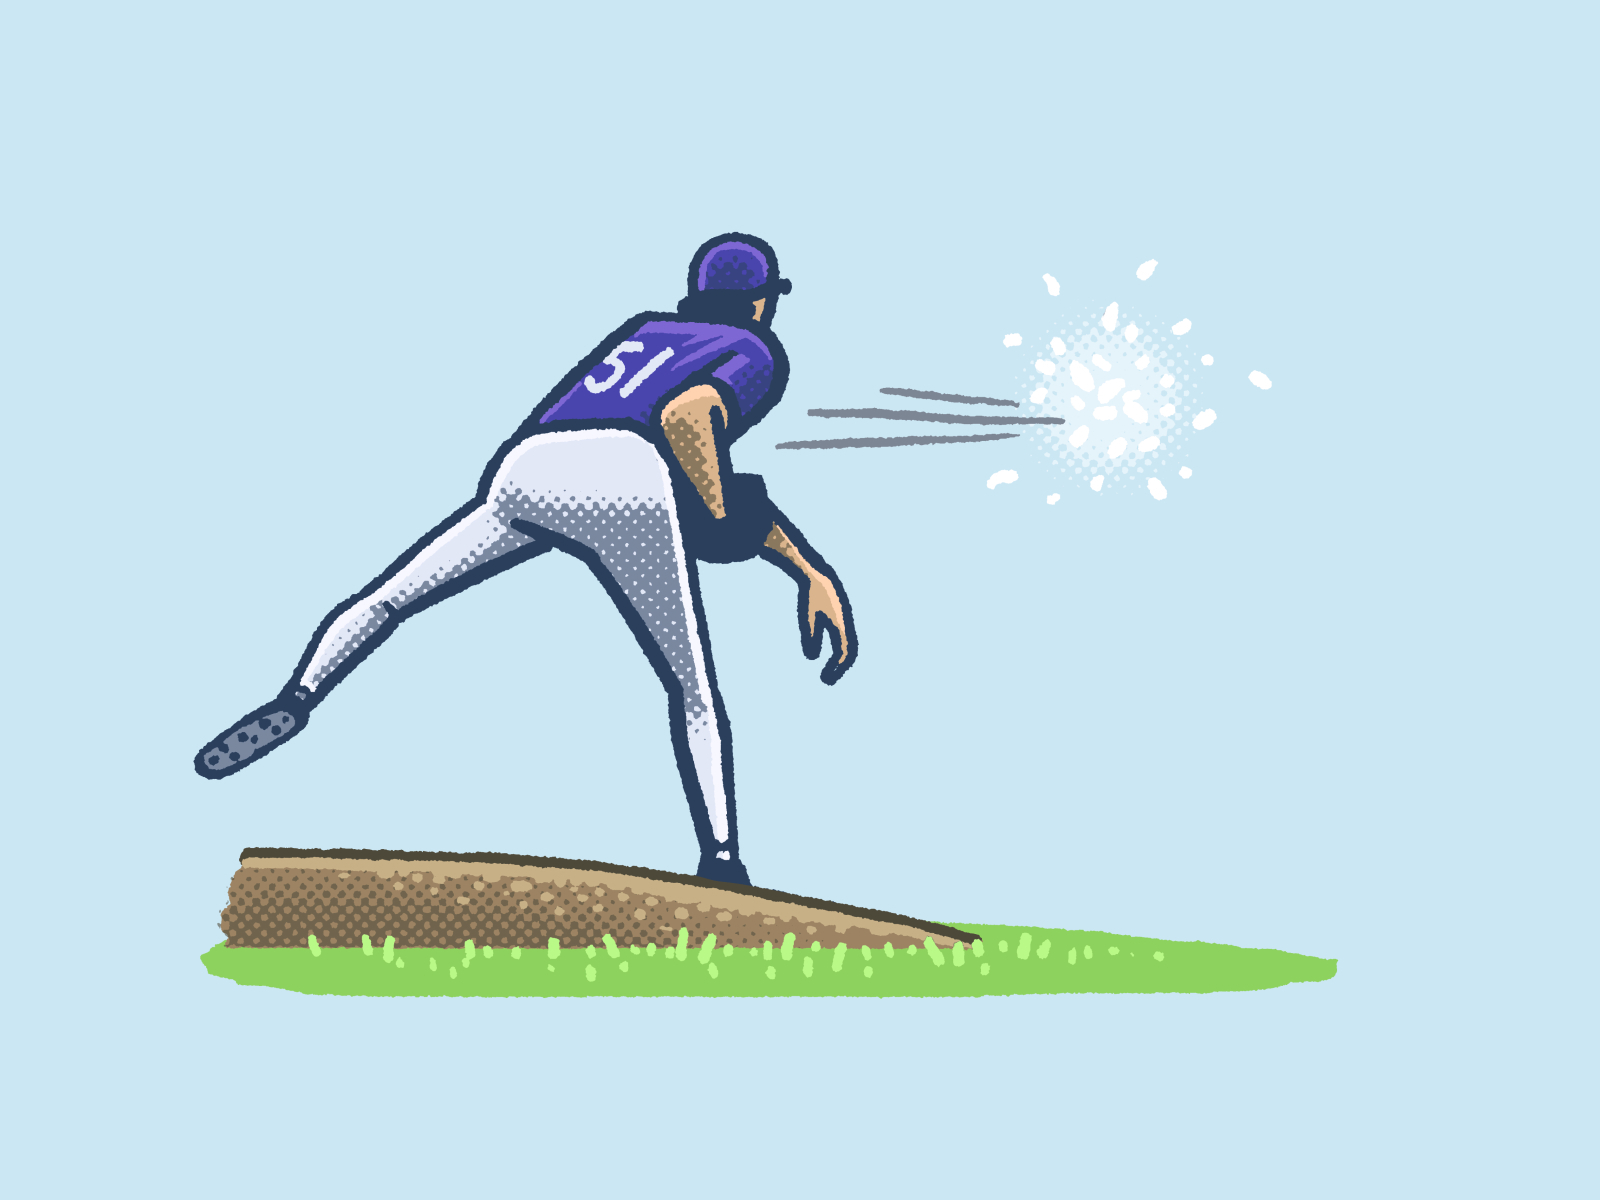 Randy Johnson Kills a Dove With a Pitch by Mario Zucca on Dribbble